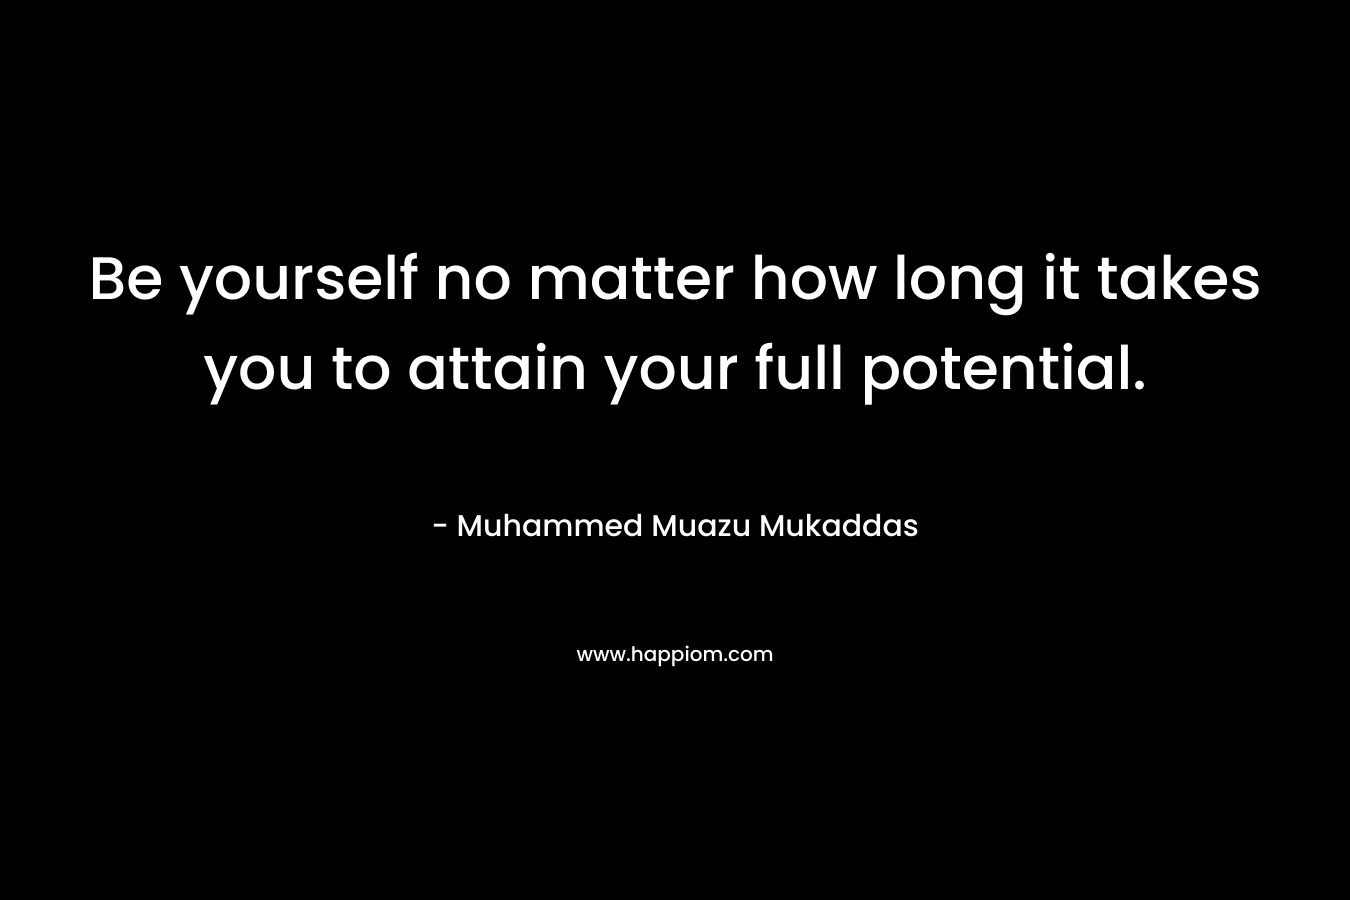 Be yourself no matter how long it takes you to attain your full potential.